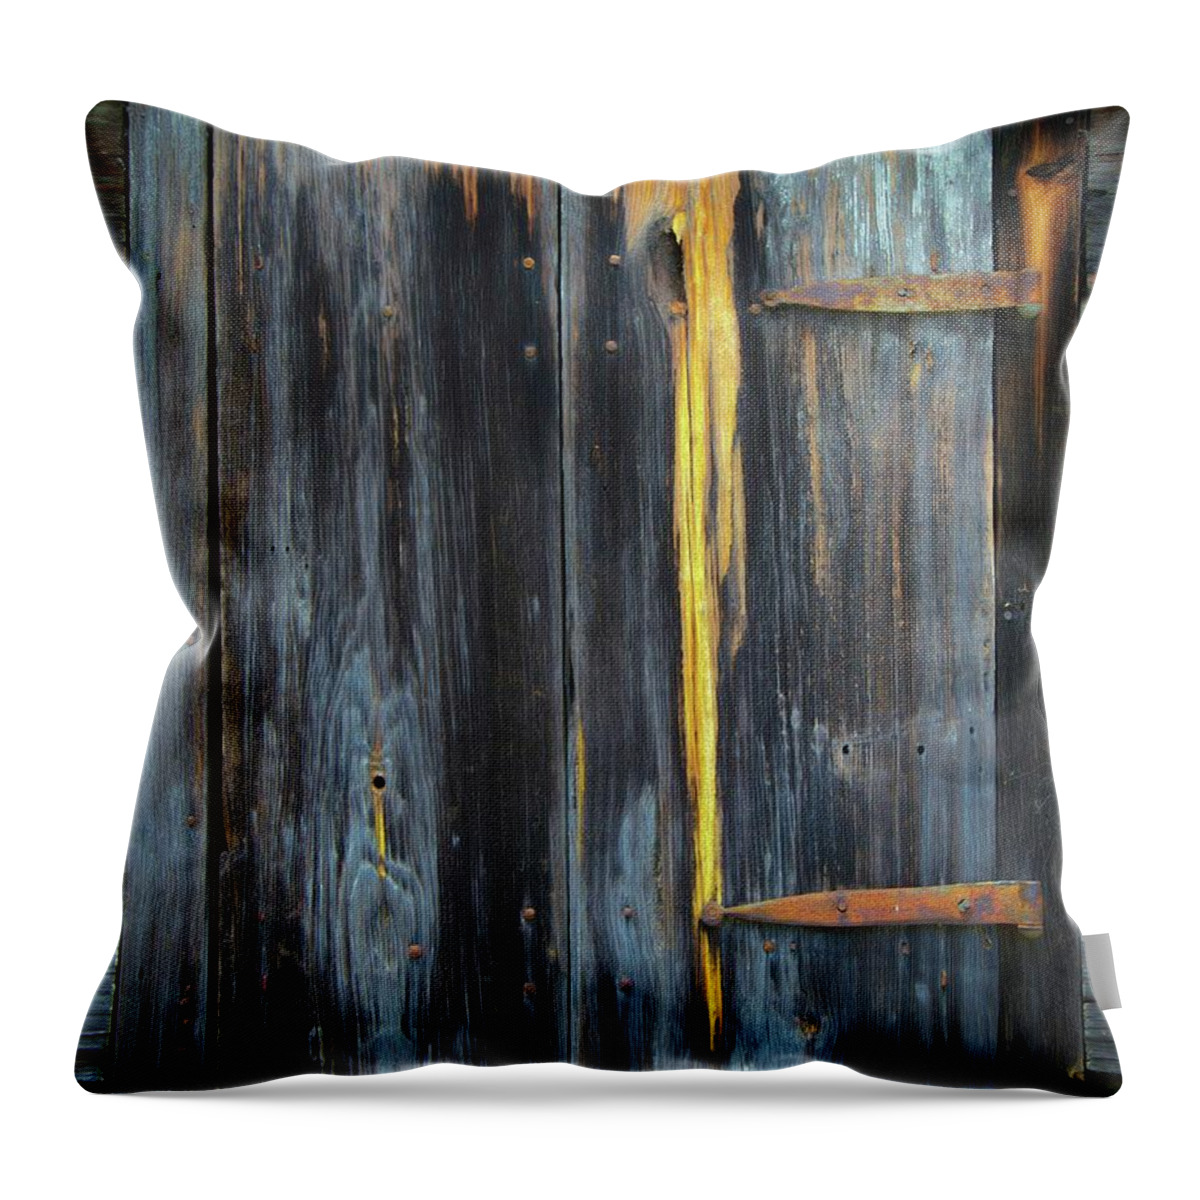 Culture Throw Pillow featuring the photograph Portrait Of A Window by Skip Willits